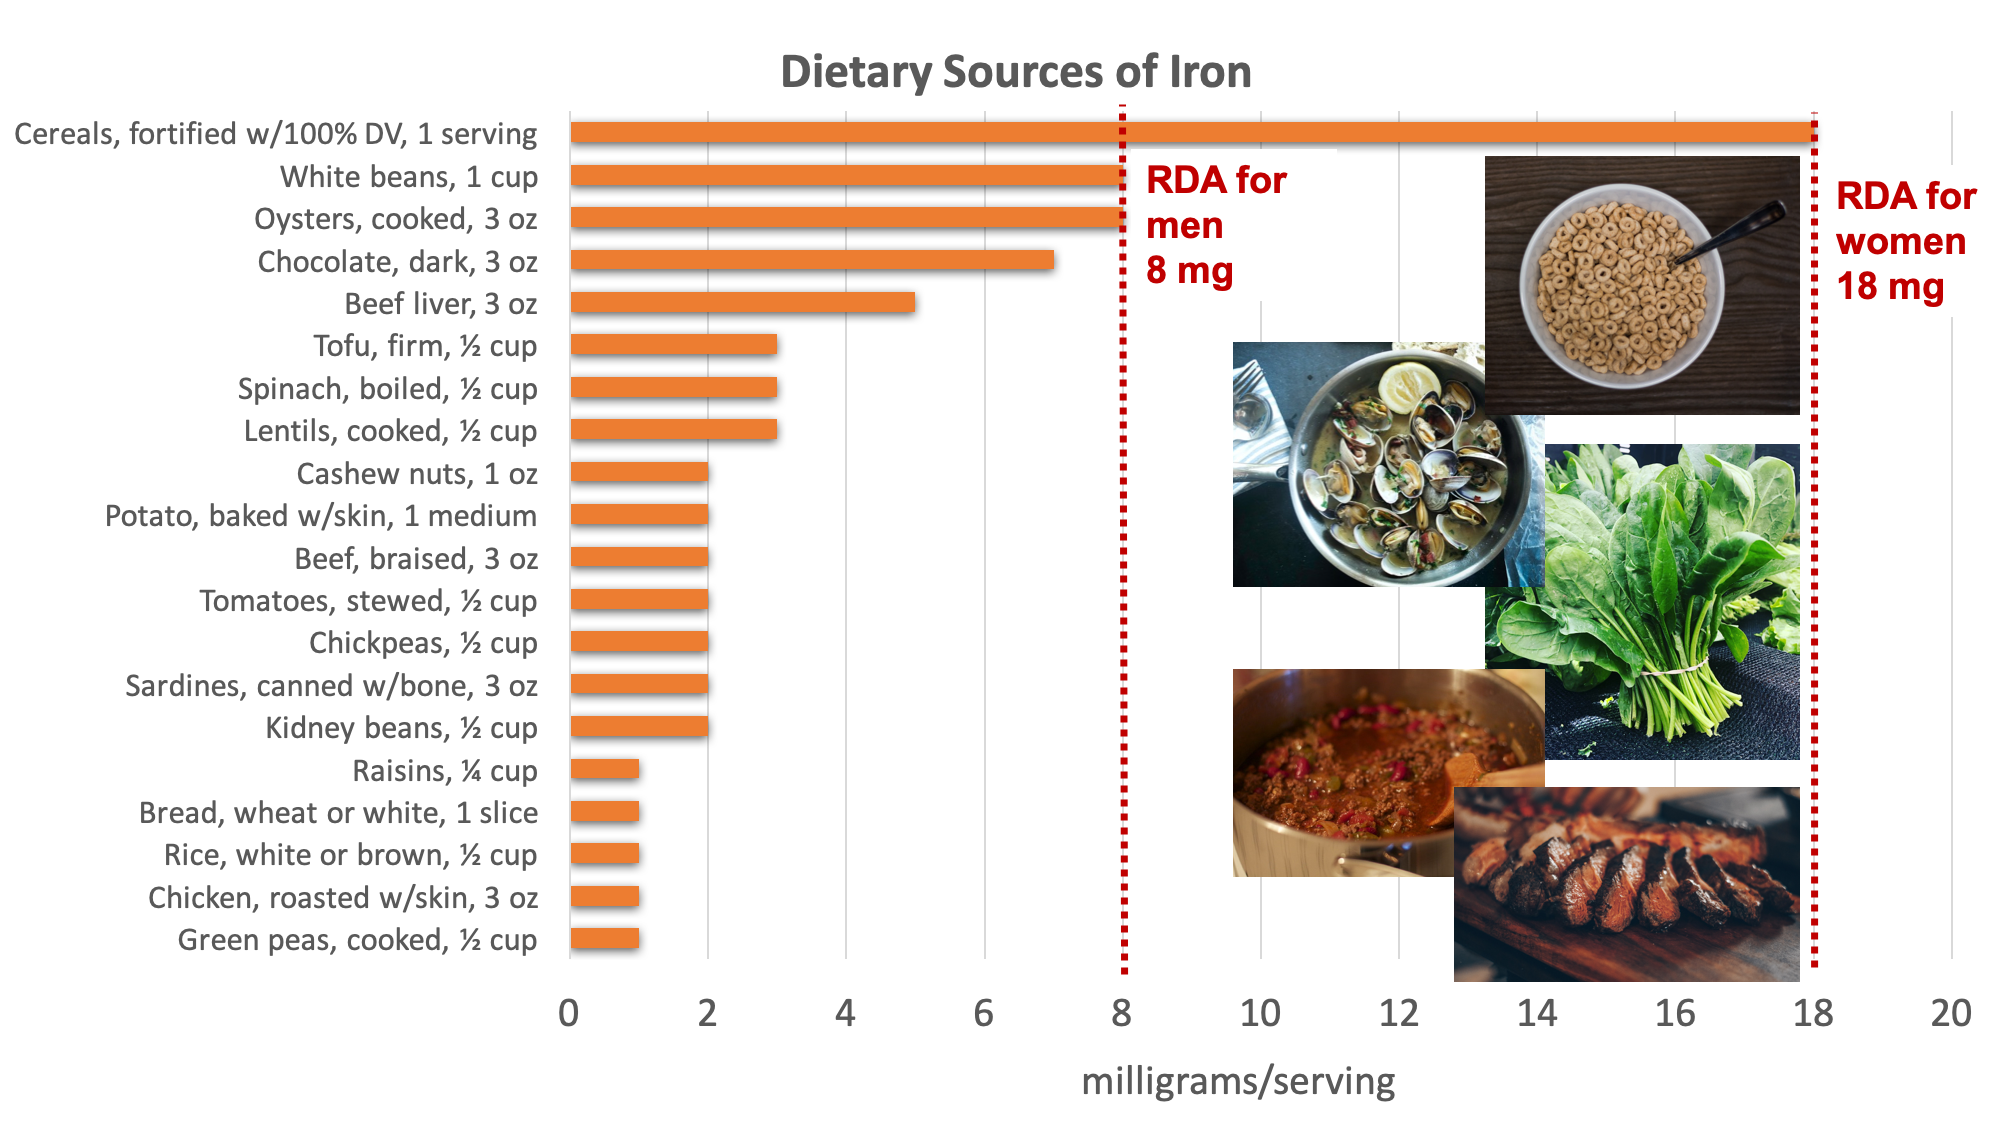 Bar graph showing dietary sources of iron compared with the RDA for adult women of 18 mg and for men of 8 mg. Top sources include fortified cereals, legumes, oysters, chocolate, beef liver, tofu, spinach, nuts, potato, tomatoes, and sardines. Sources pictured include cereal, oysters, spinach, chili with beans and beef, and steak.